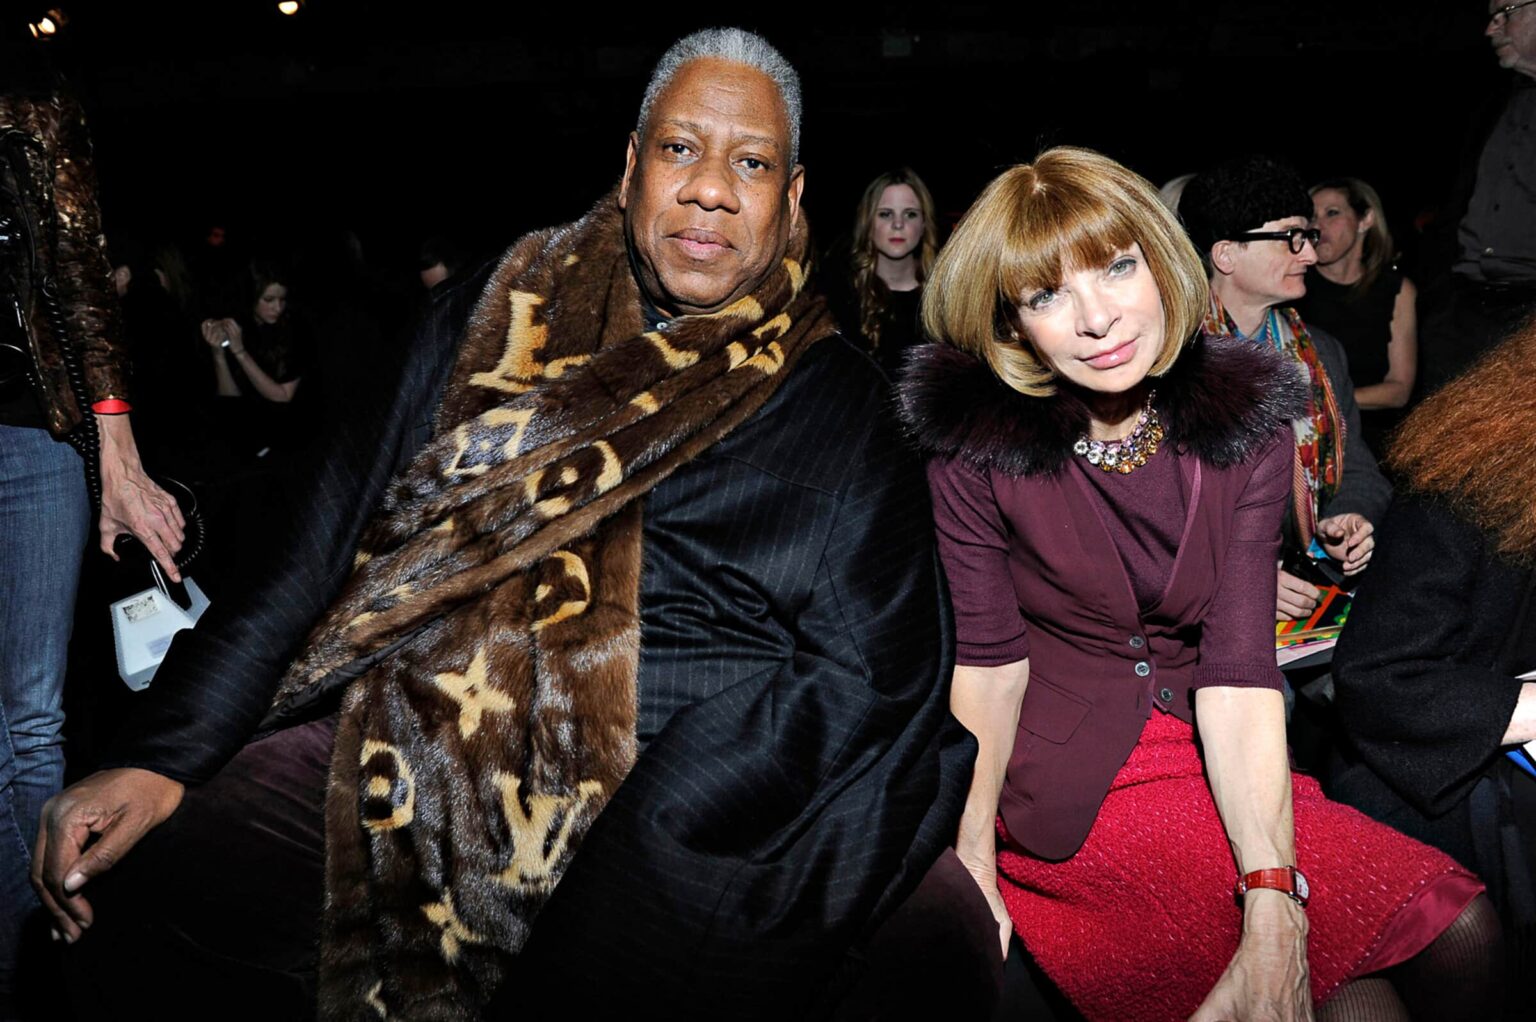 Today, we mourn the loss of a legend. André Leon Talley has definitely secured a place for himself in fashion history. Learn some of his greatest quotes!